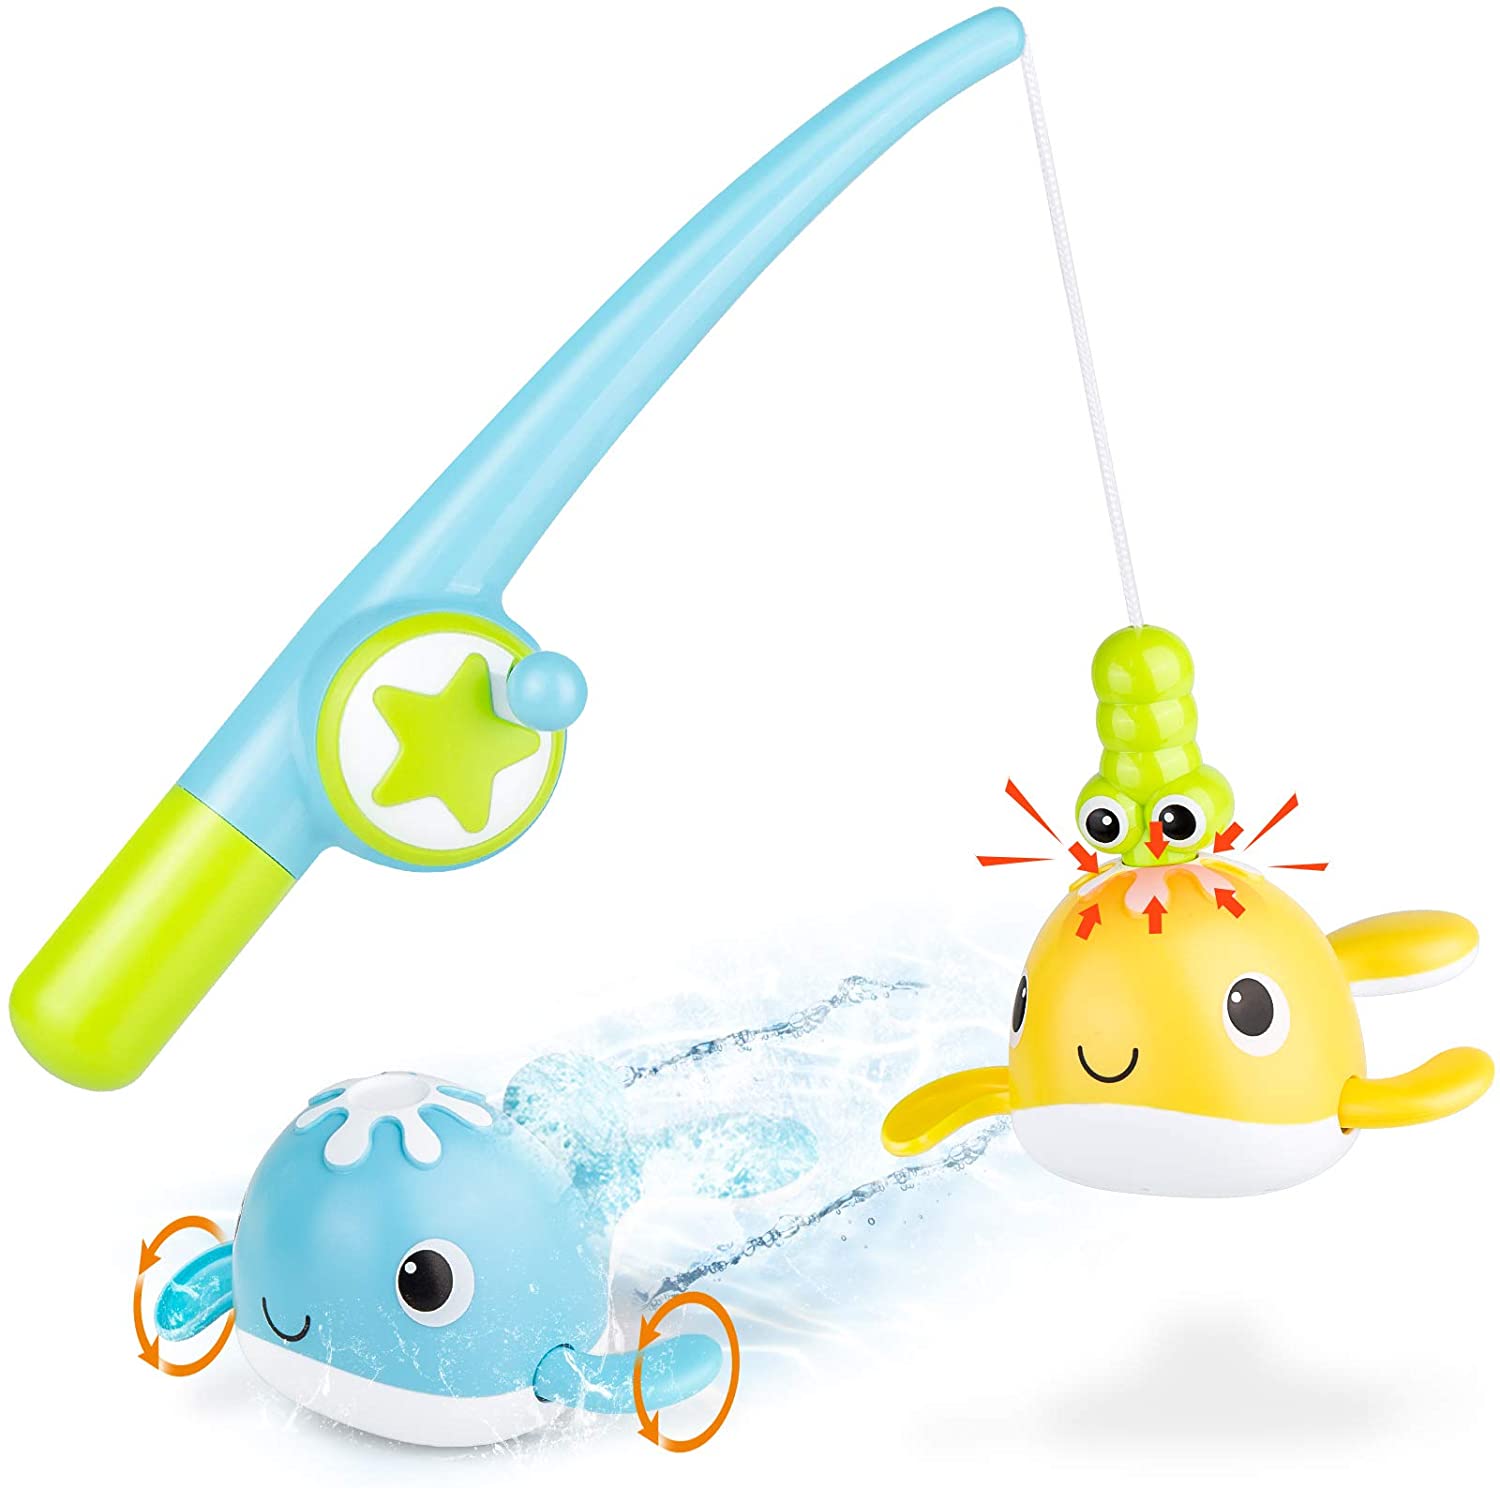 DWI Dowellin Bath Toys Magnetic Fishing Games Baby Bath Toys Wind-up Swimming Fish Duck Whale Toys Floating Pool Bathtub Tub Toys for Toddlers Kids Infant Age 18 Months and up Girl Boy 